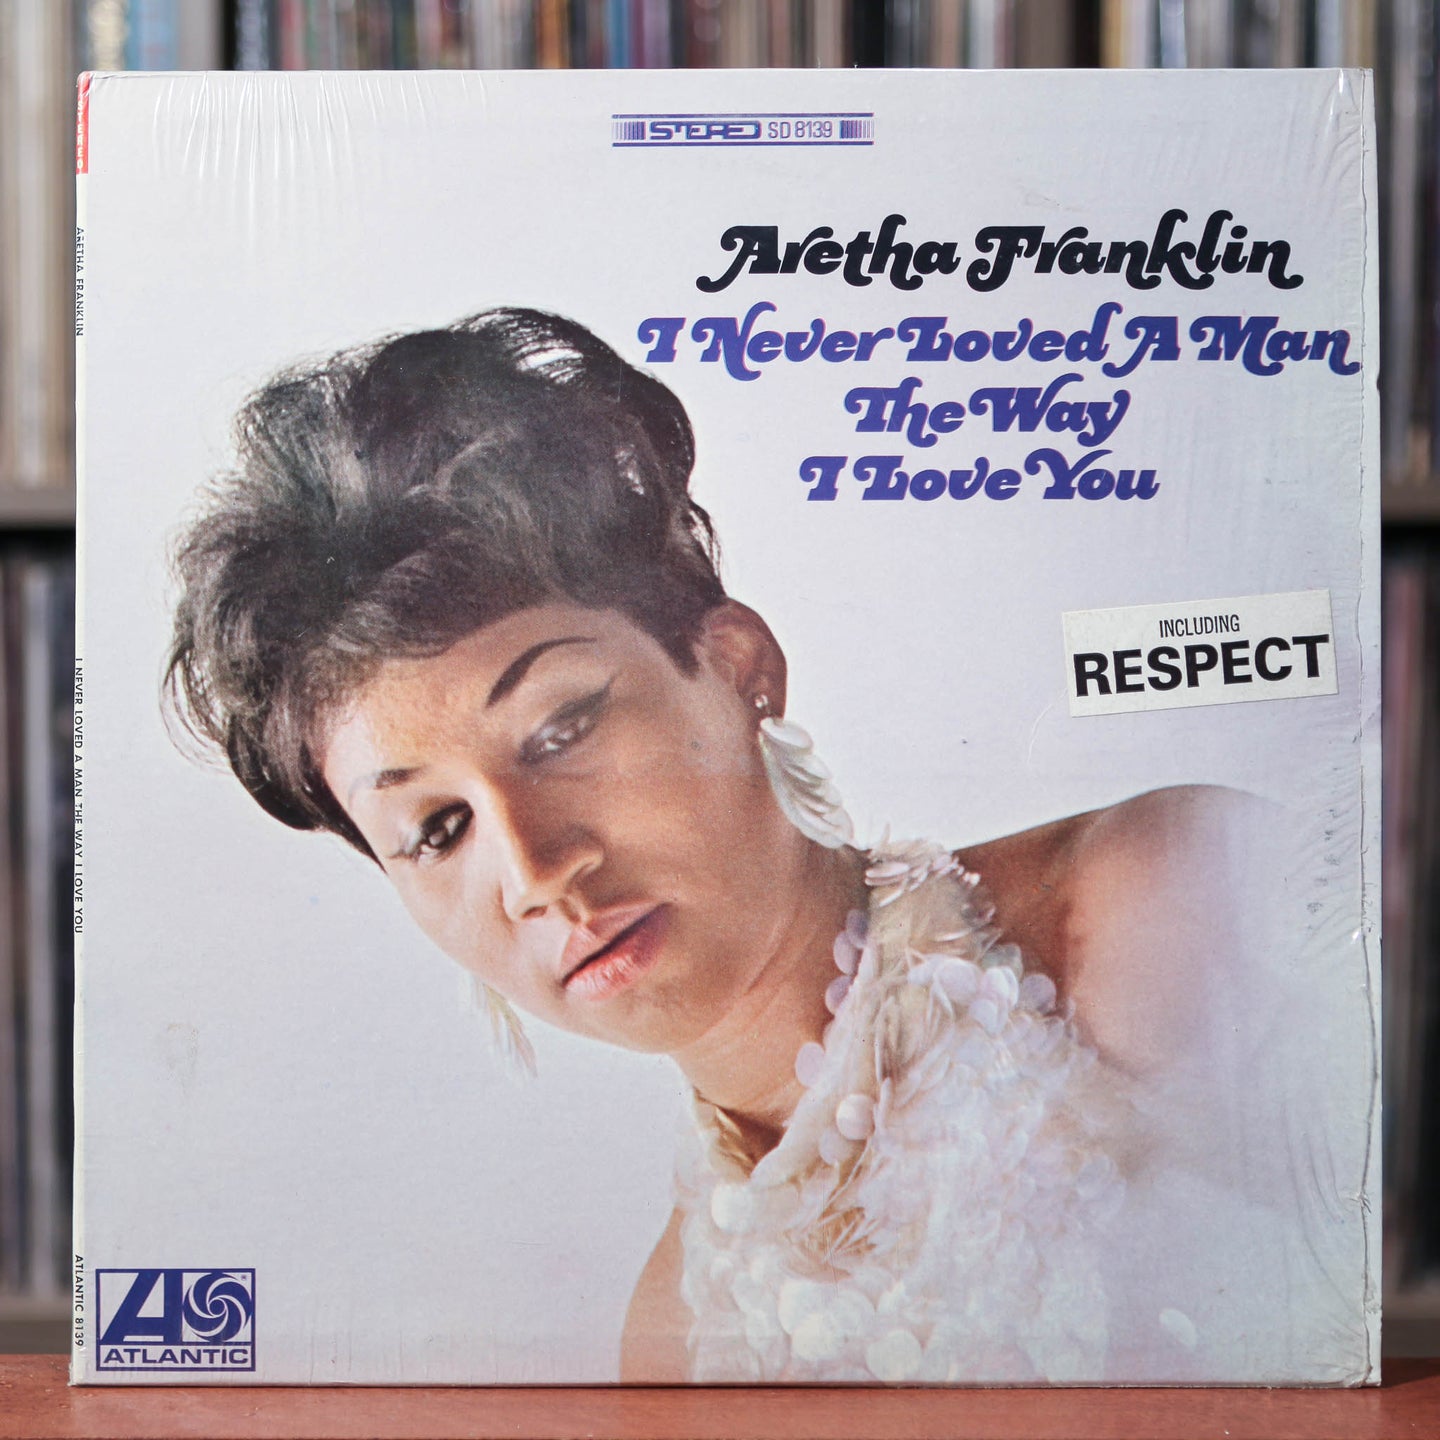 Aretha Franklin - I Never Loved A Man The Way I Love You - 1967 Atlantic, EX/EX w/Shrink  and Hype